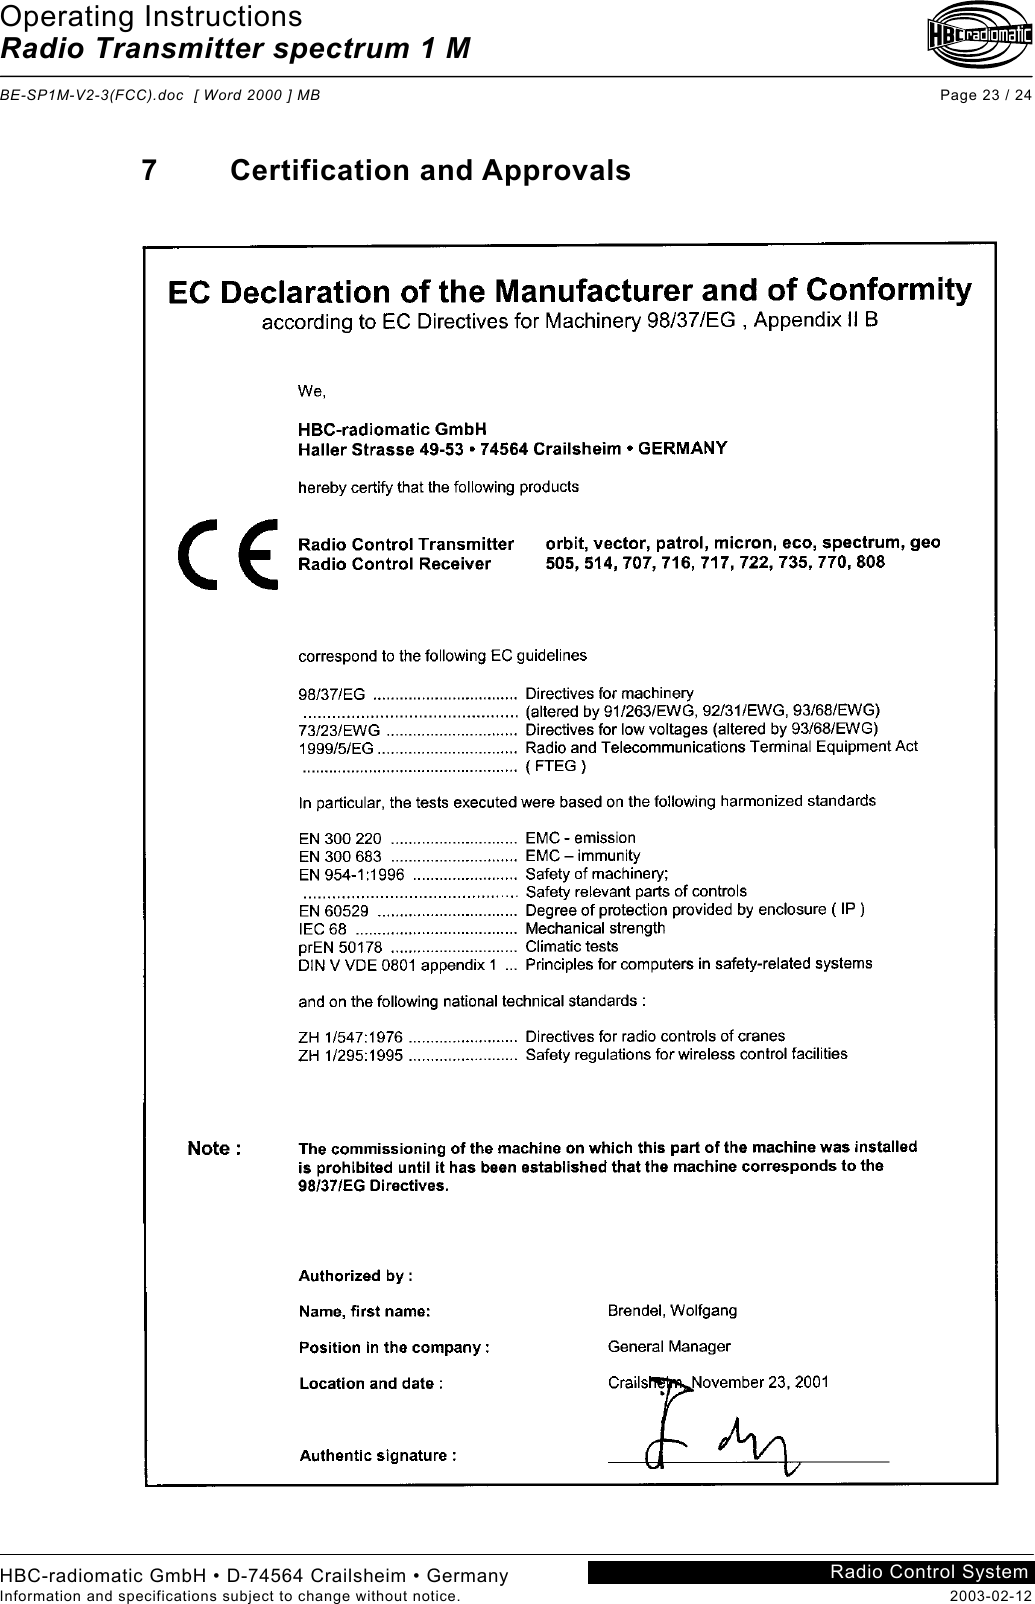 Operating Instructions Radio Transmitter spectrum 1 M  BE-SP1M-V2-3(FCC).doc  [ Word 2000 ] MB Page 23 / 24 HBC-radiomatic GmbH • D-74564 Crailsheim • Germany Information and specifications subject to change without notice.  2003-02-12 Radio Control System    7 Certification and Approvals 